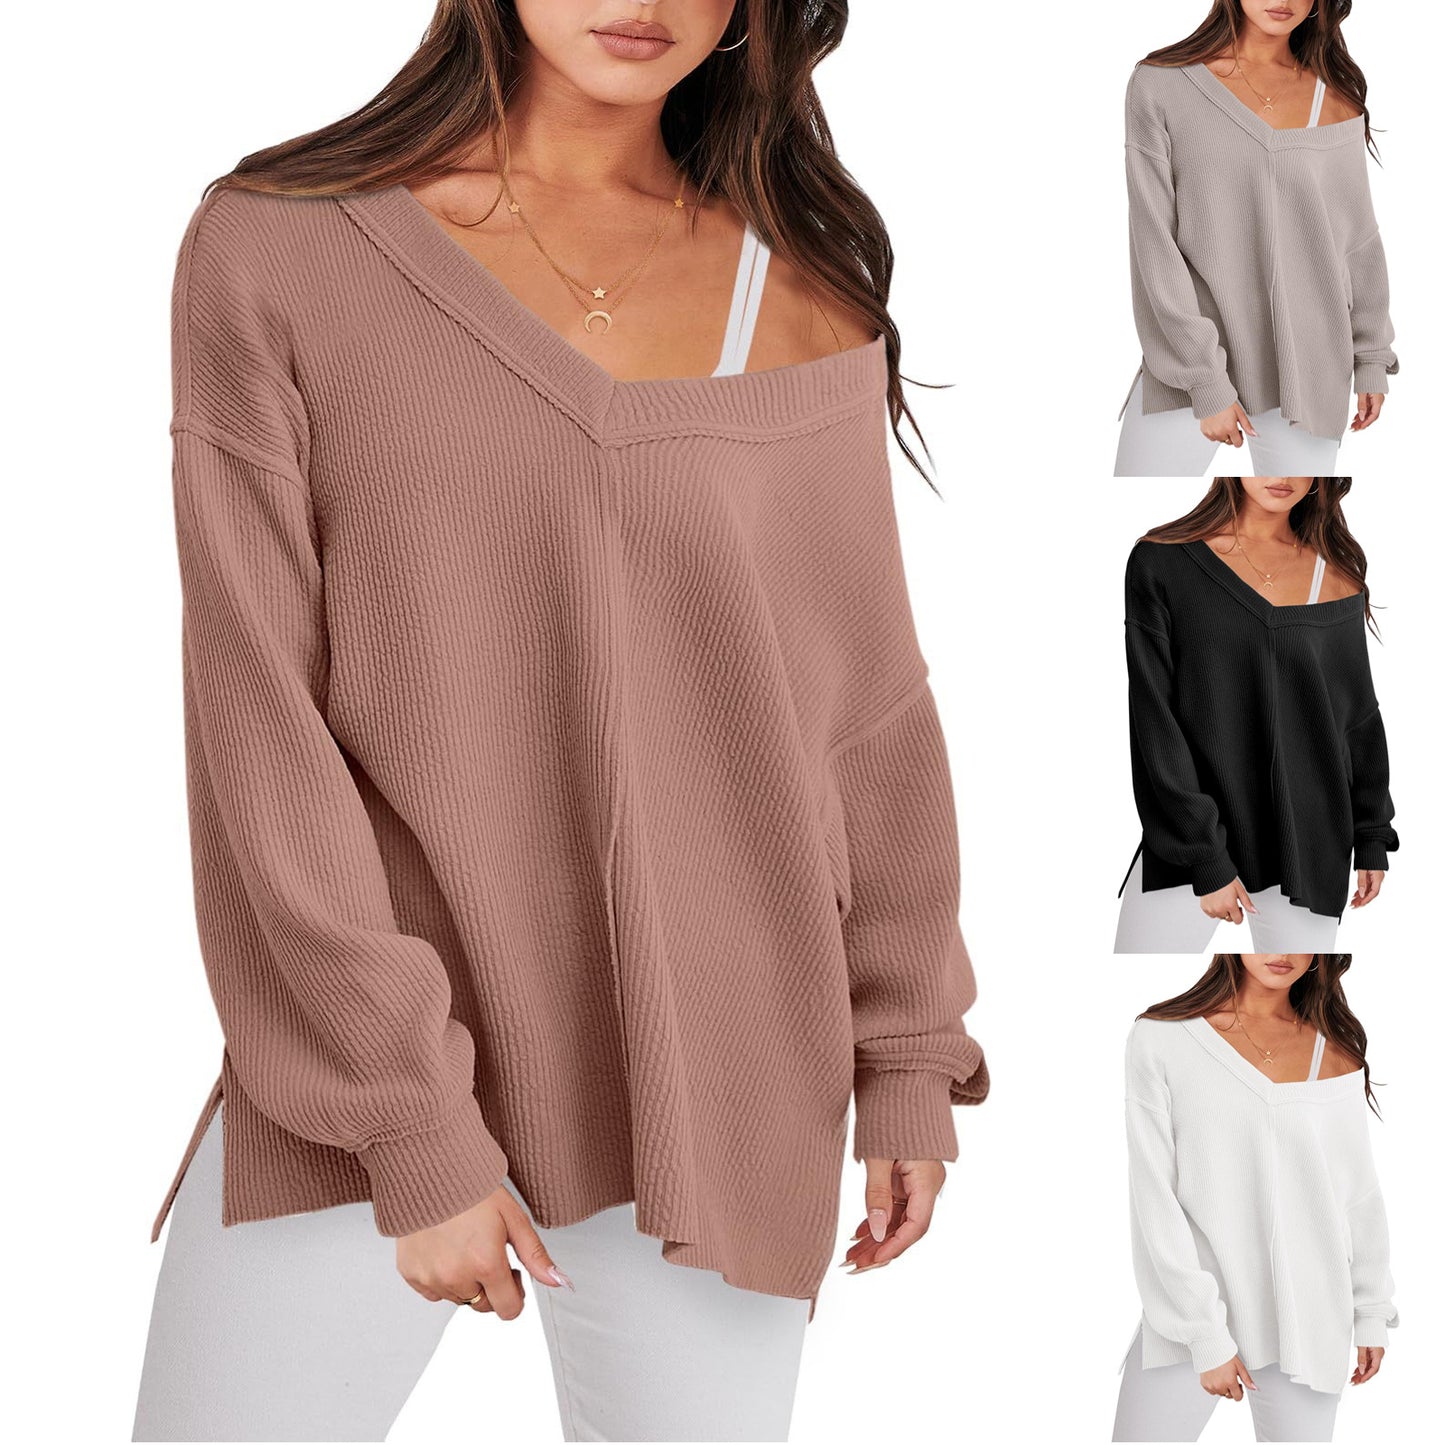 Fashion Lightweight V-neck Sweaters Women Casual Long Sleeve Ribbed Knit Side Slit Pullover Top